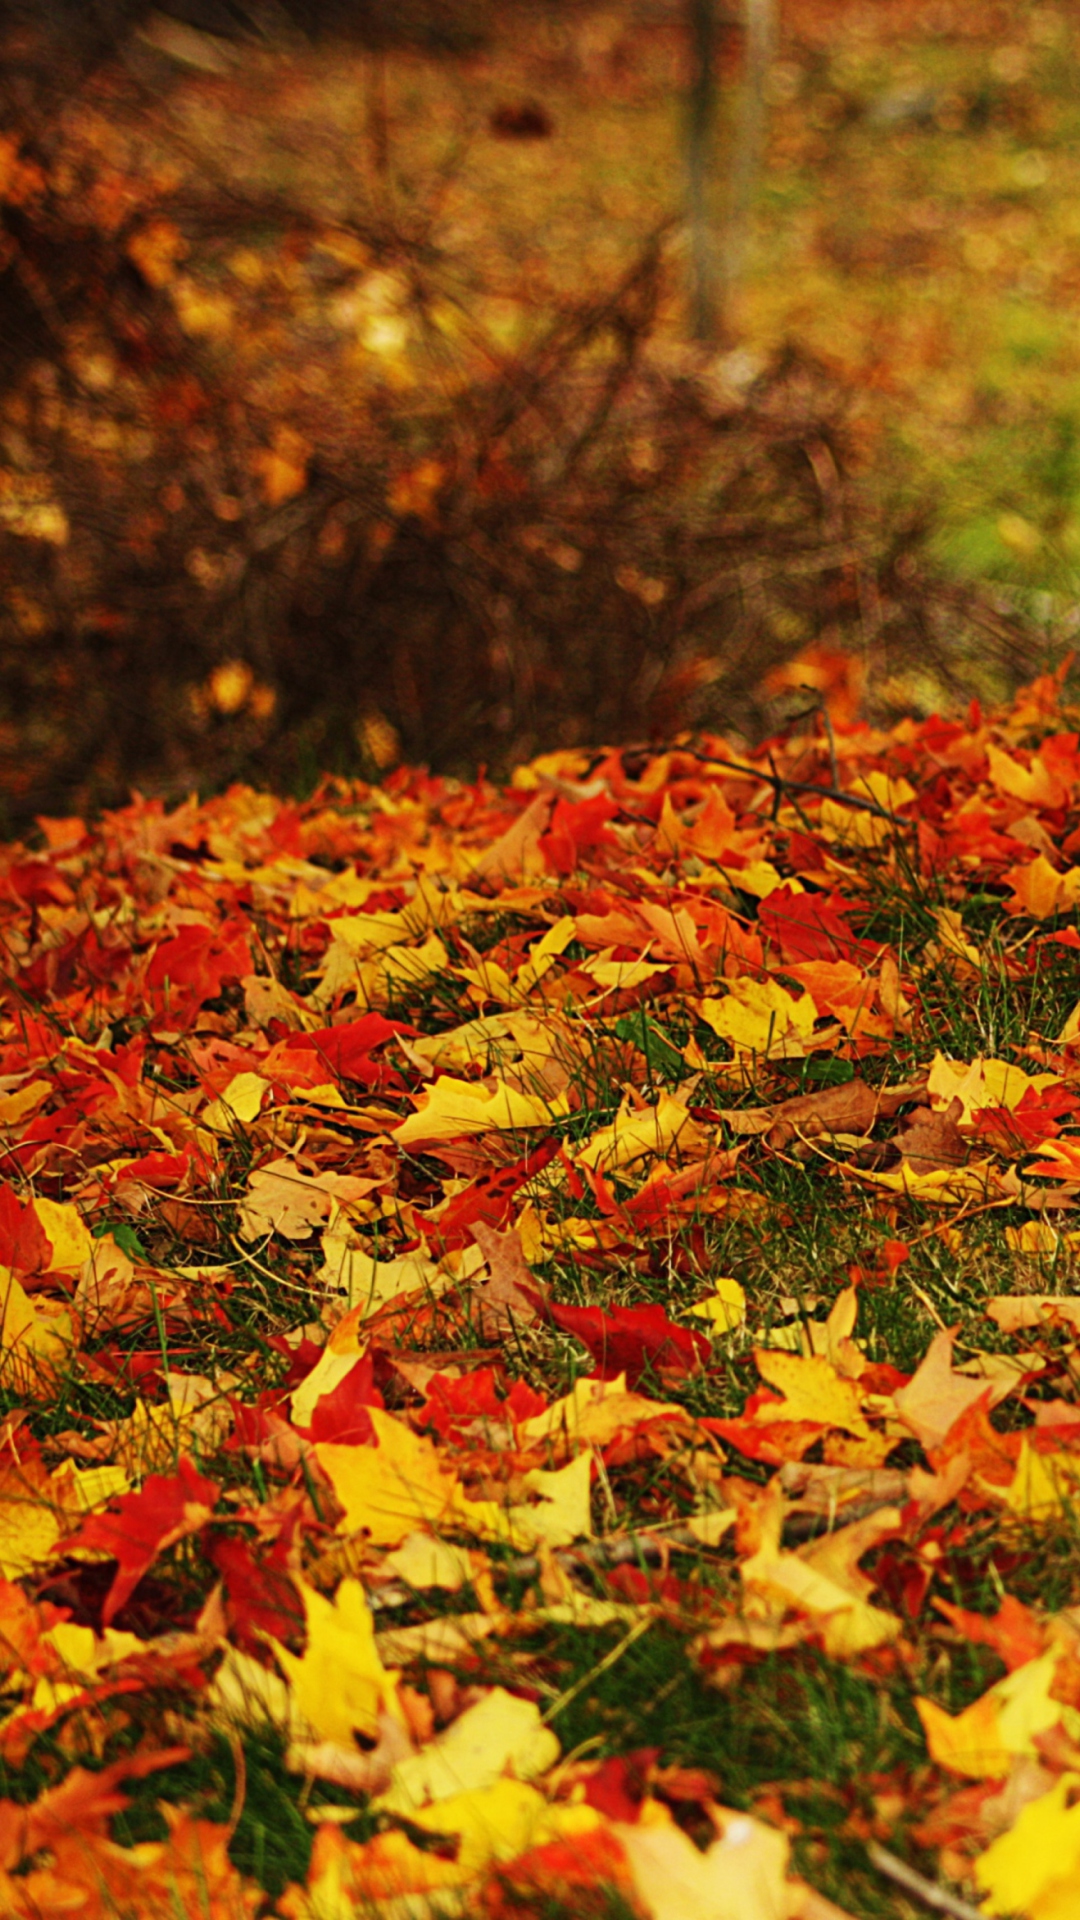 Red And Yellow Autumn Leaves wallpaper 1080x1920